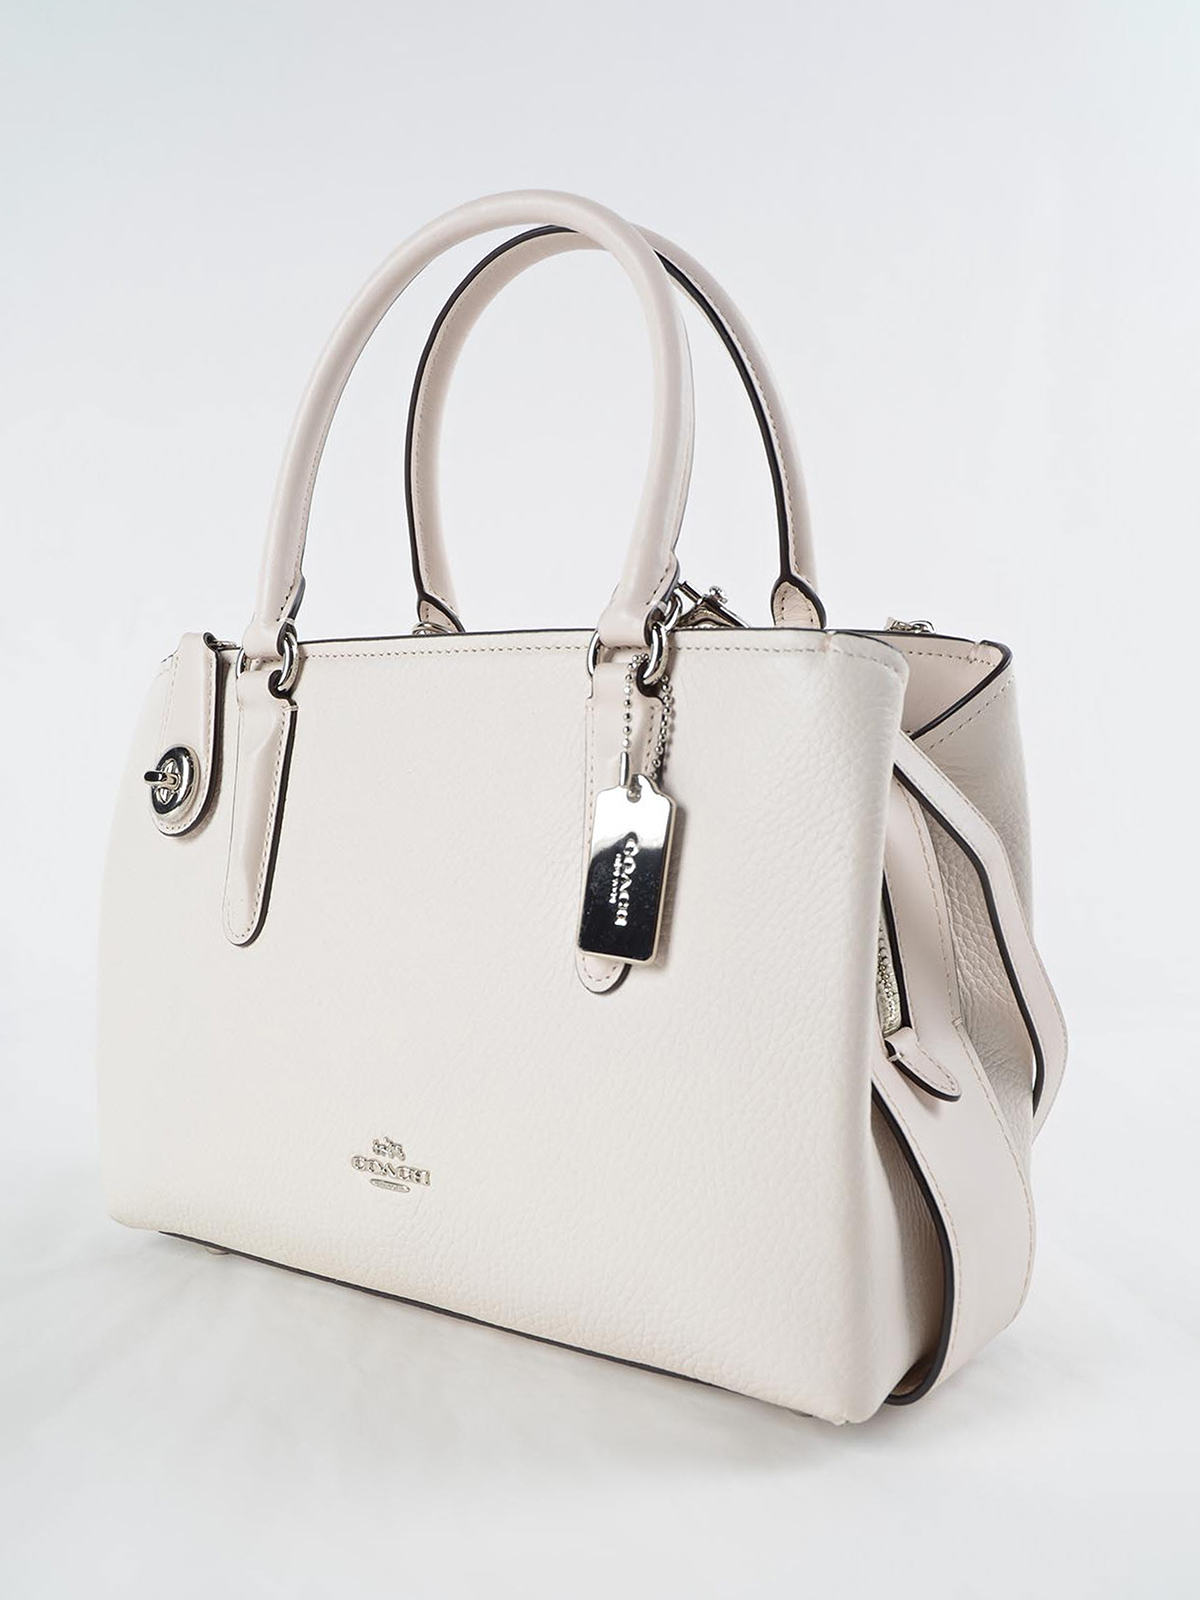 Totes bags Coach - Brooklyn pebble leather bag - 56839SVCHALK 